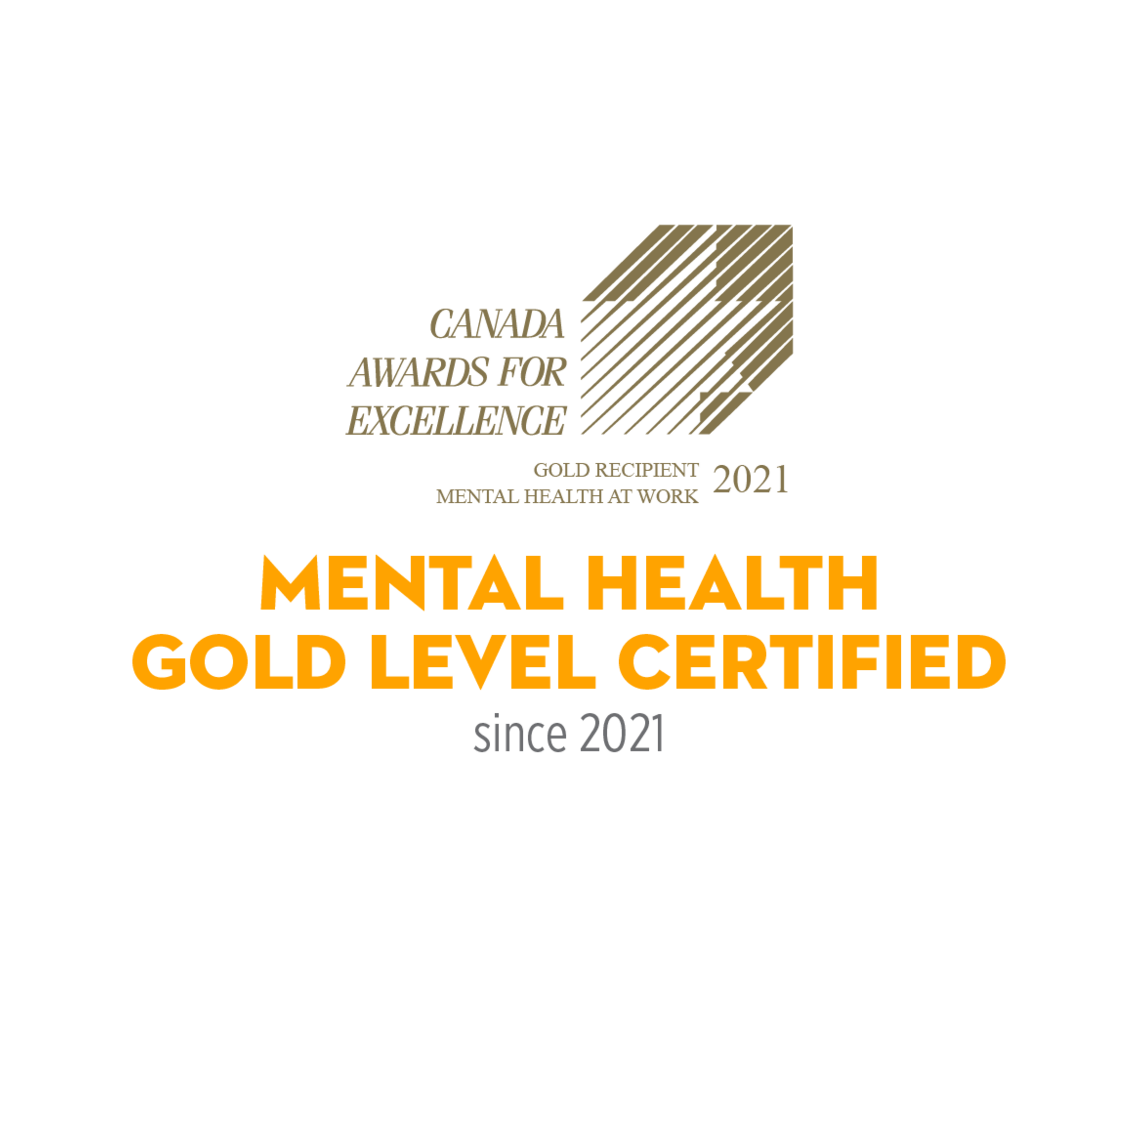 UCalgary has Mental Health Gold Level Certified since 2021 